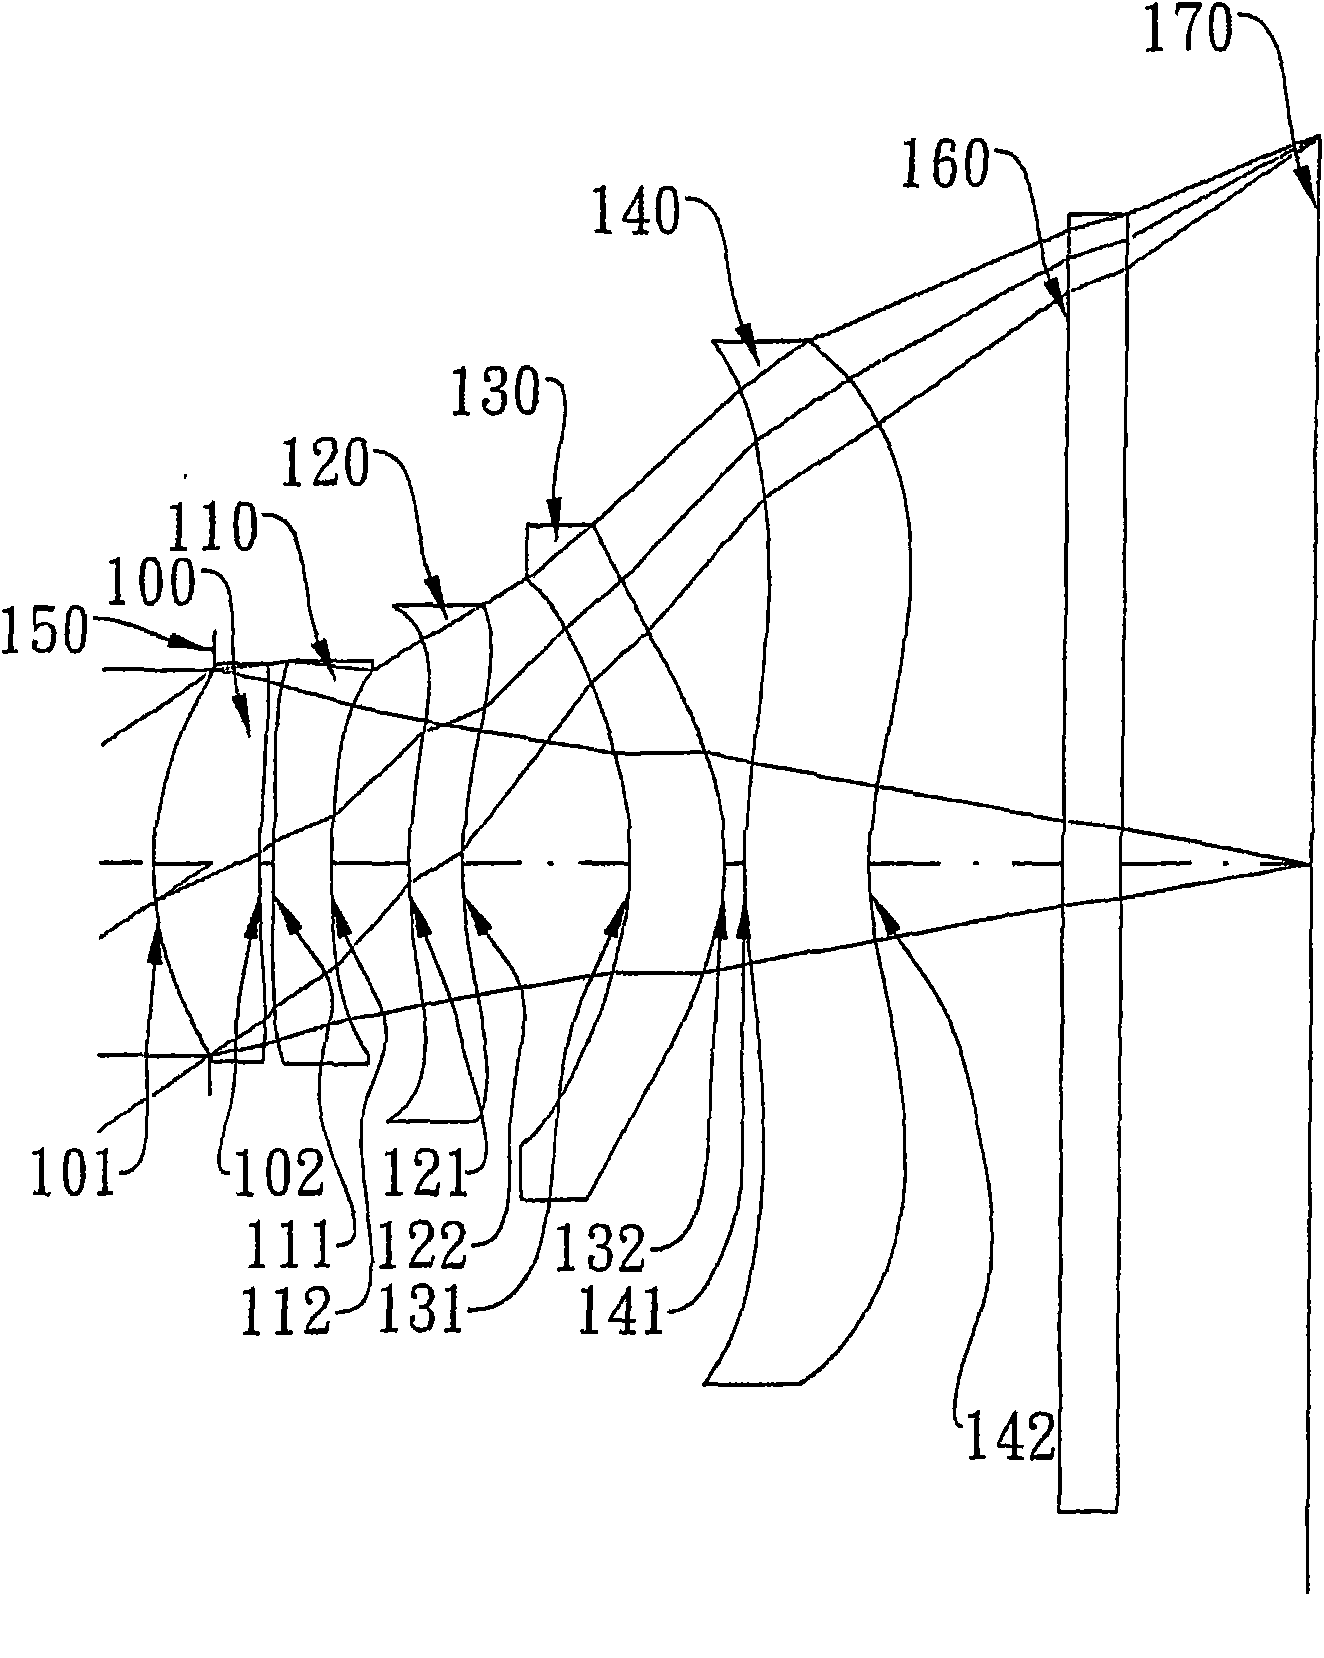 Photographic lens system